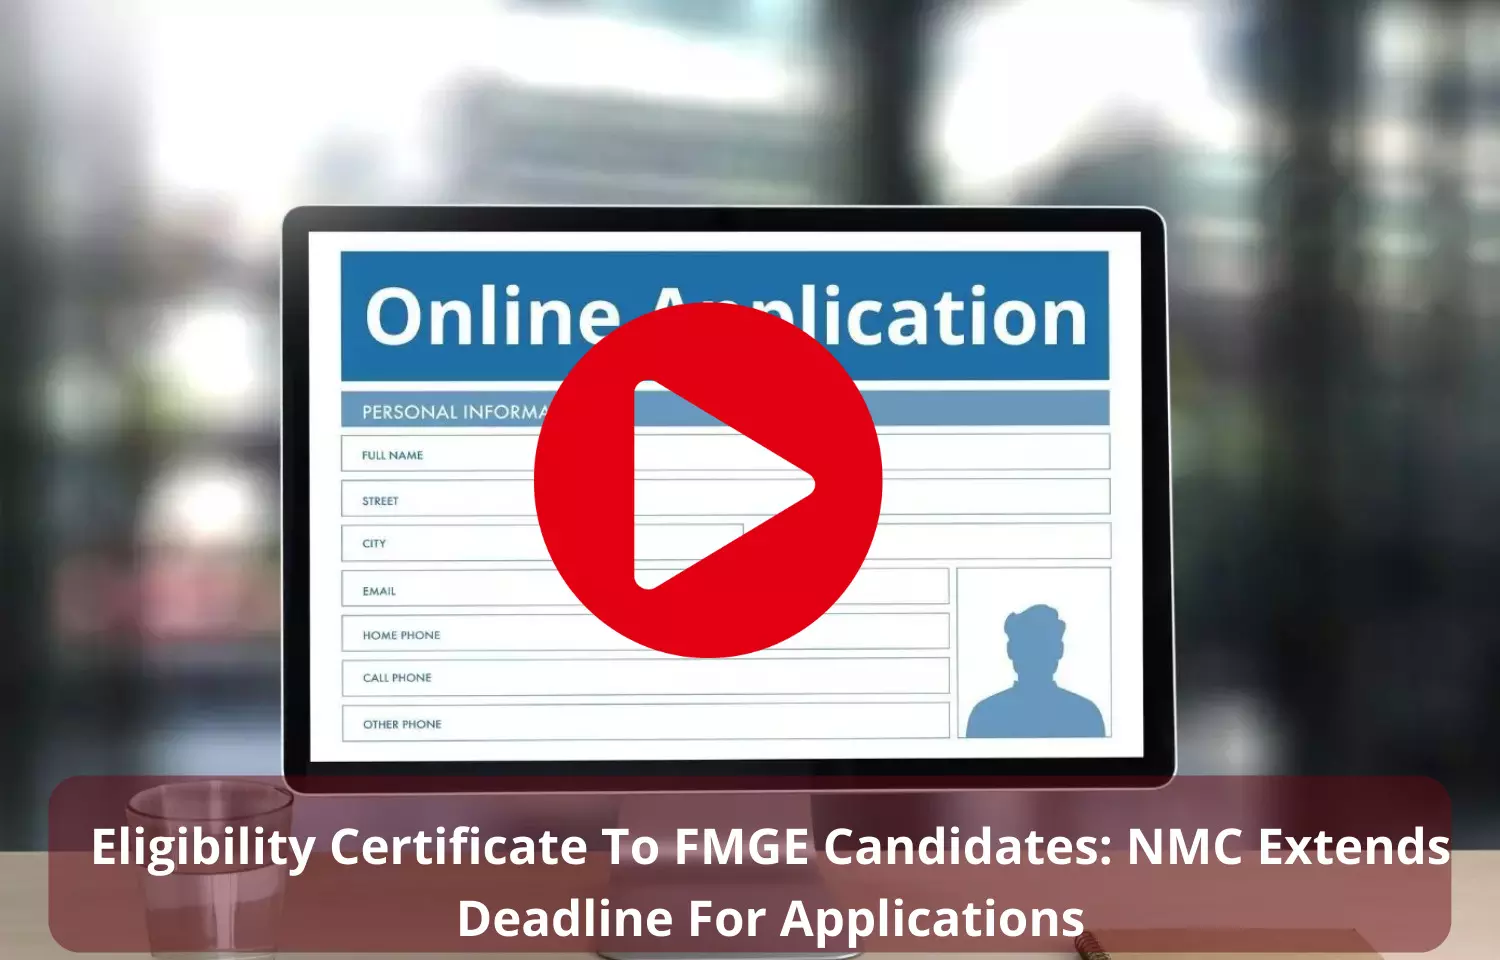 NMC extends last date to apply for eligibility certificate, Details